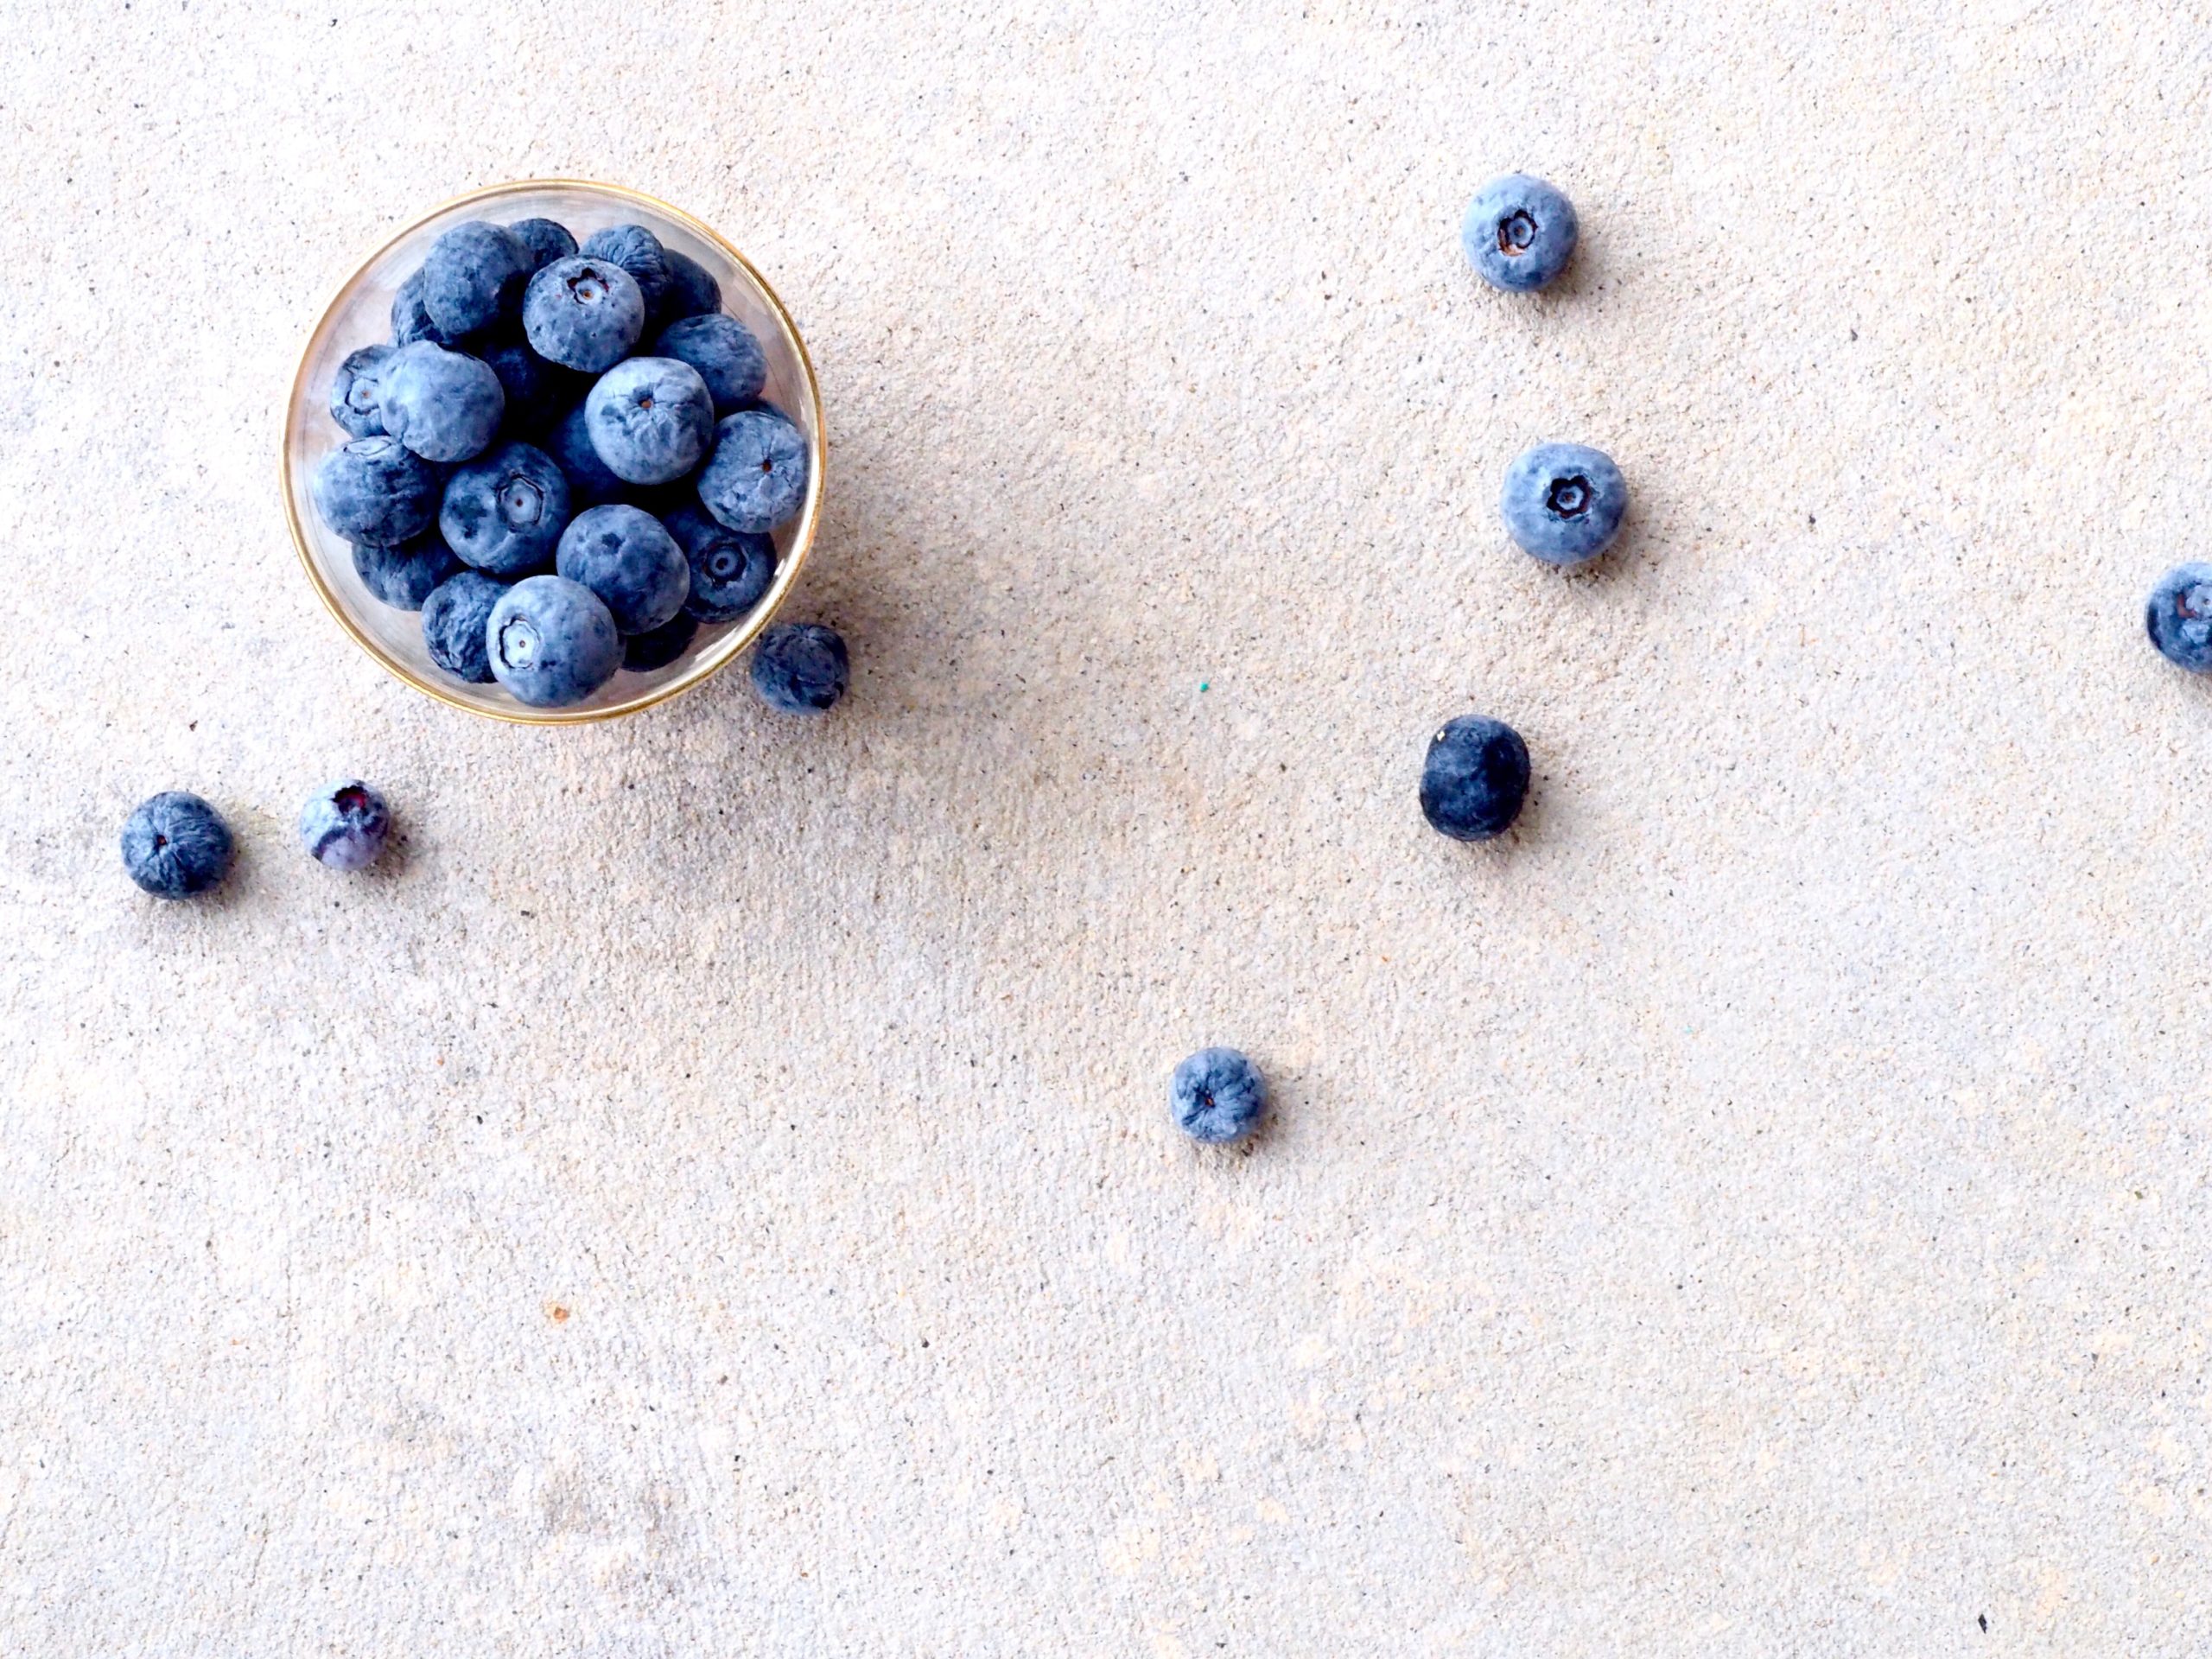 Blueberries scattered to nurture your physical health and wellbeing